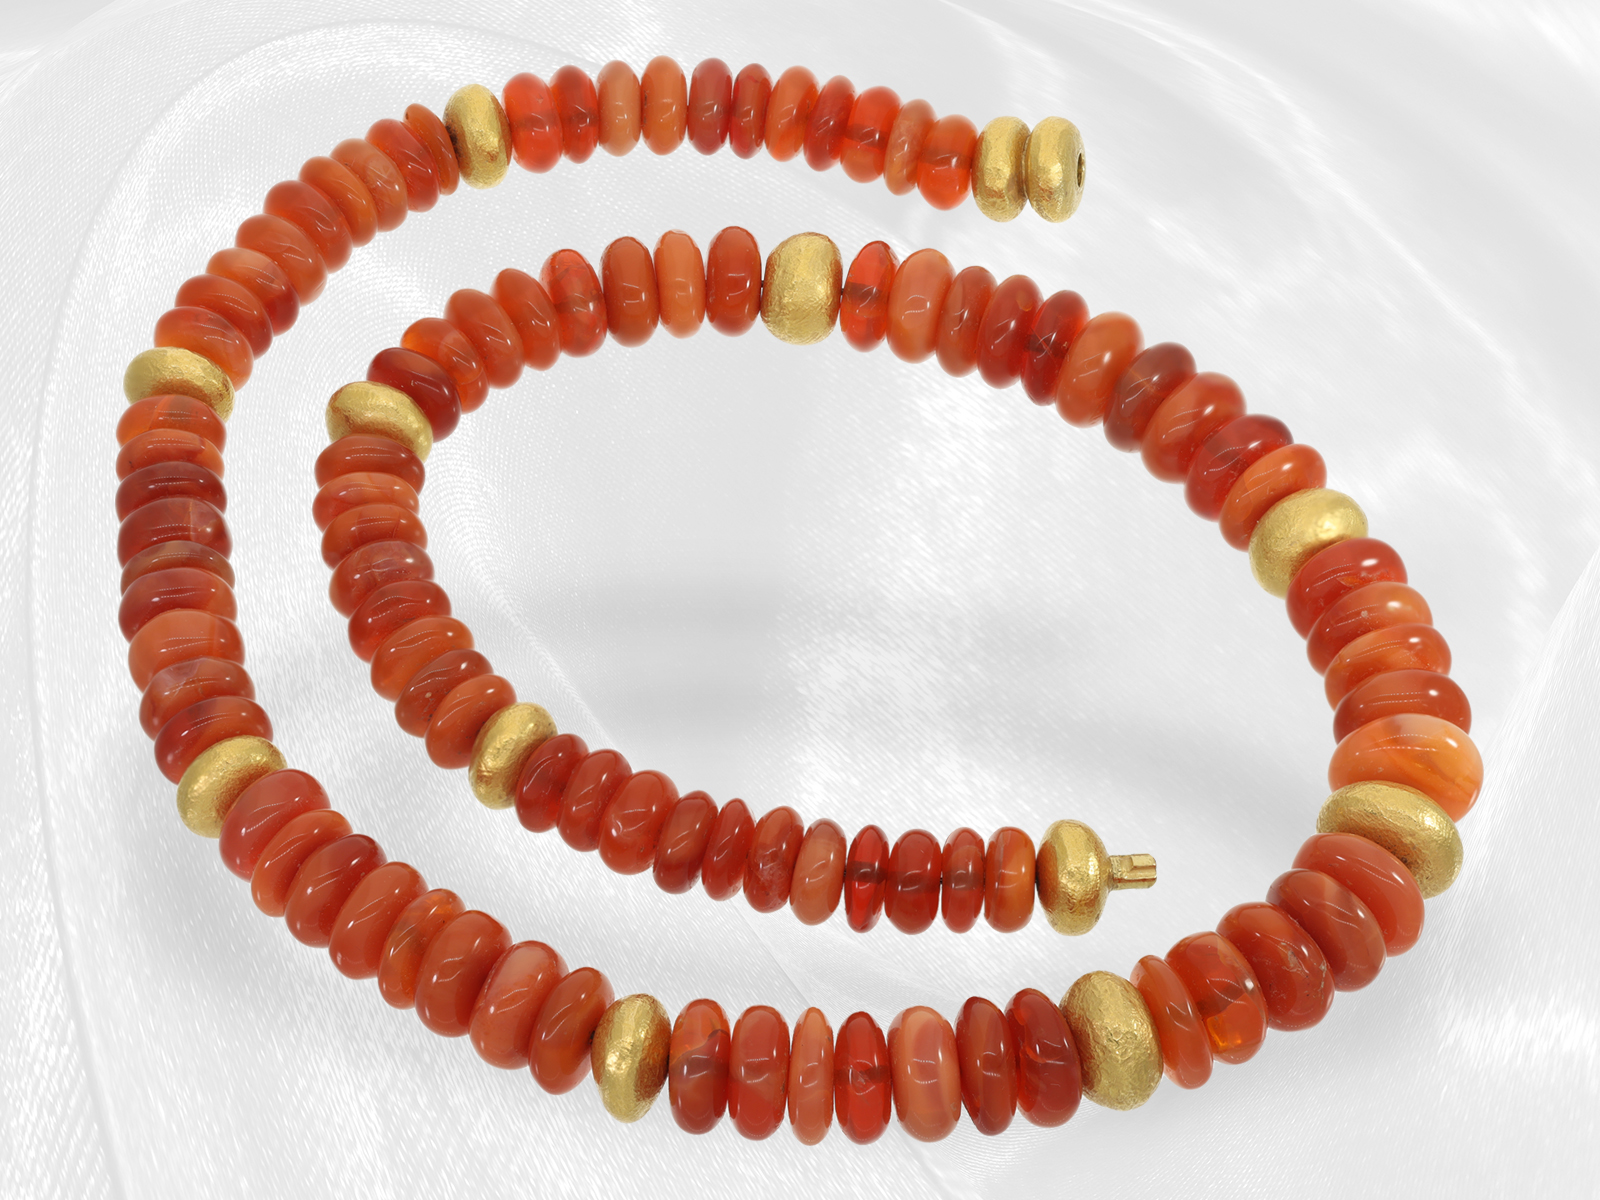 Very valuable necklace made of beautiful Mexican fire opal, like new - Image 6 of 6